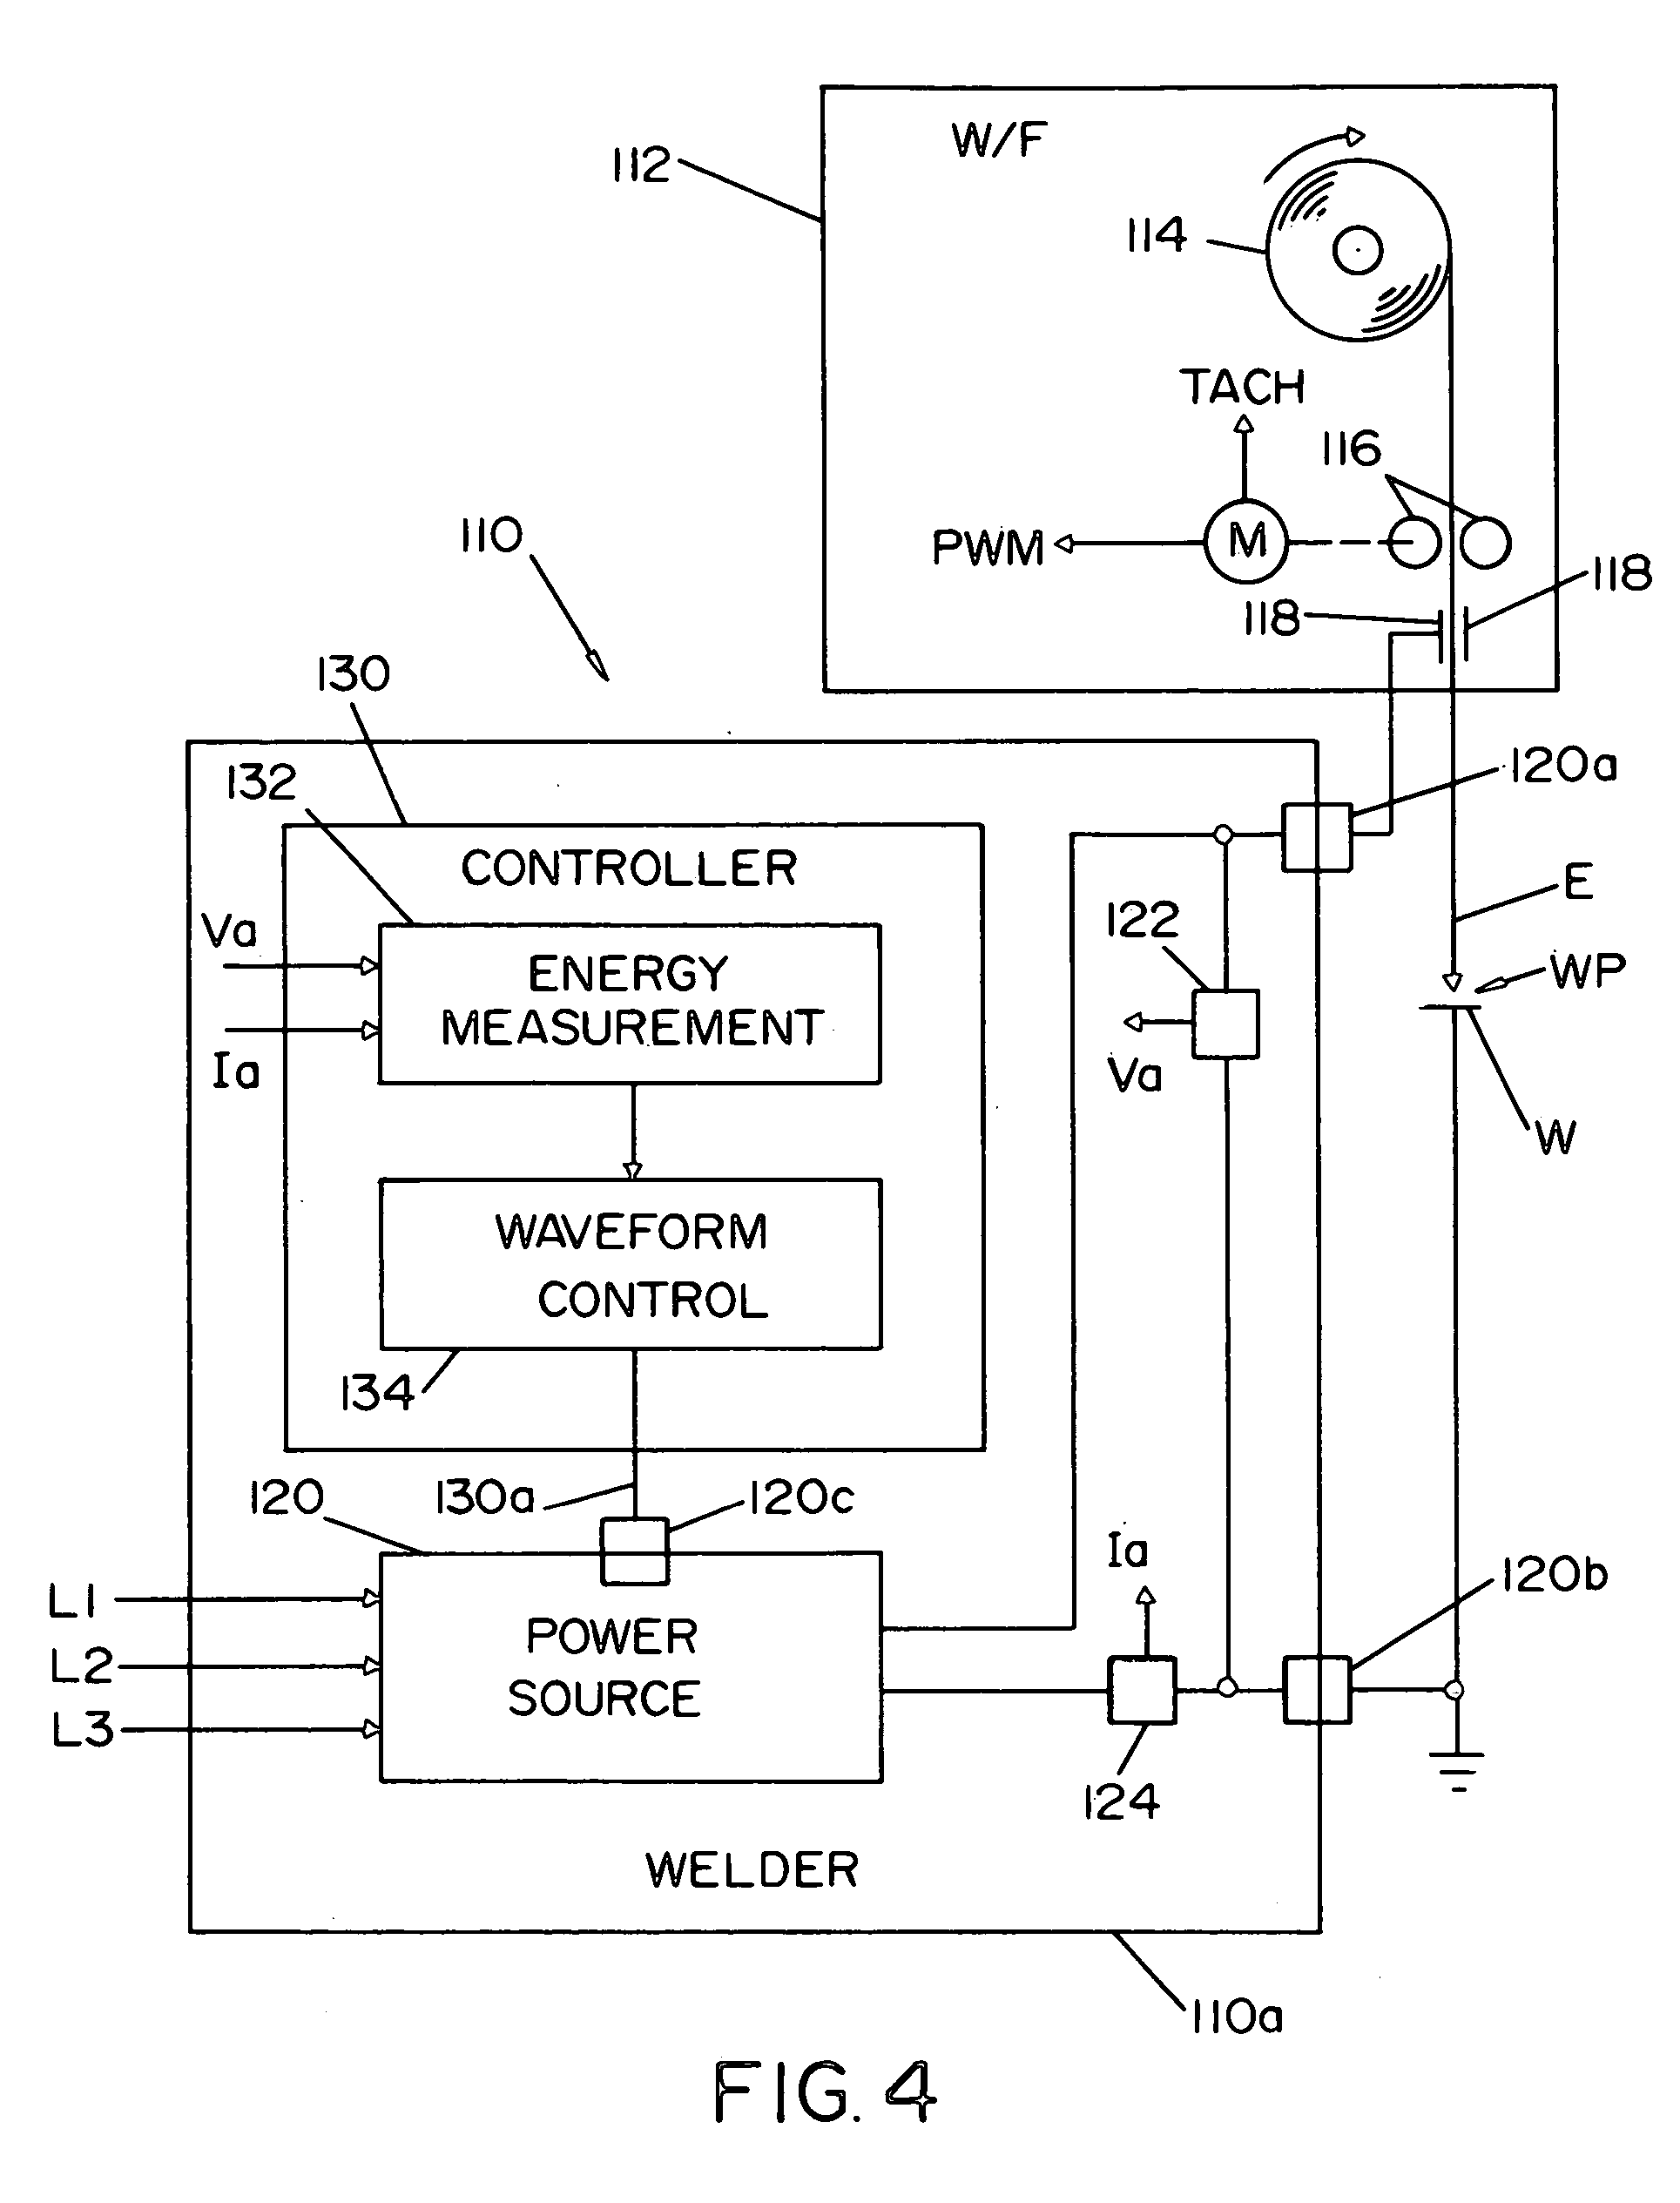 System and method for pulse welding